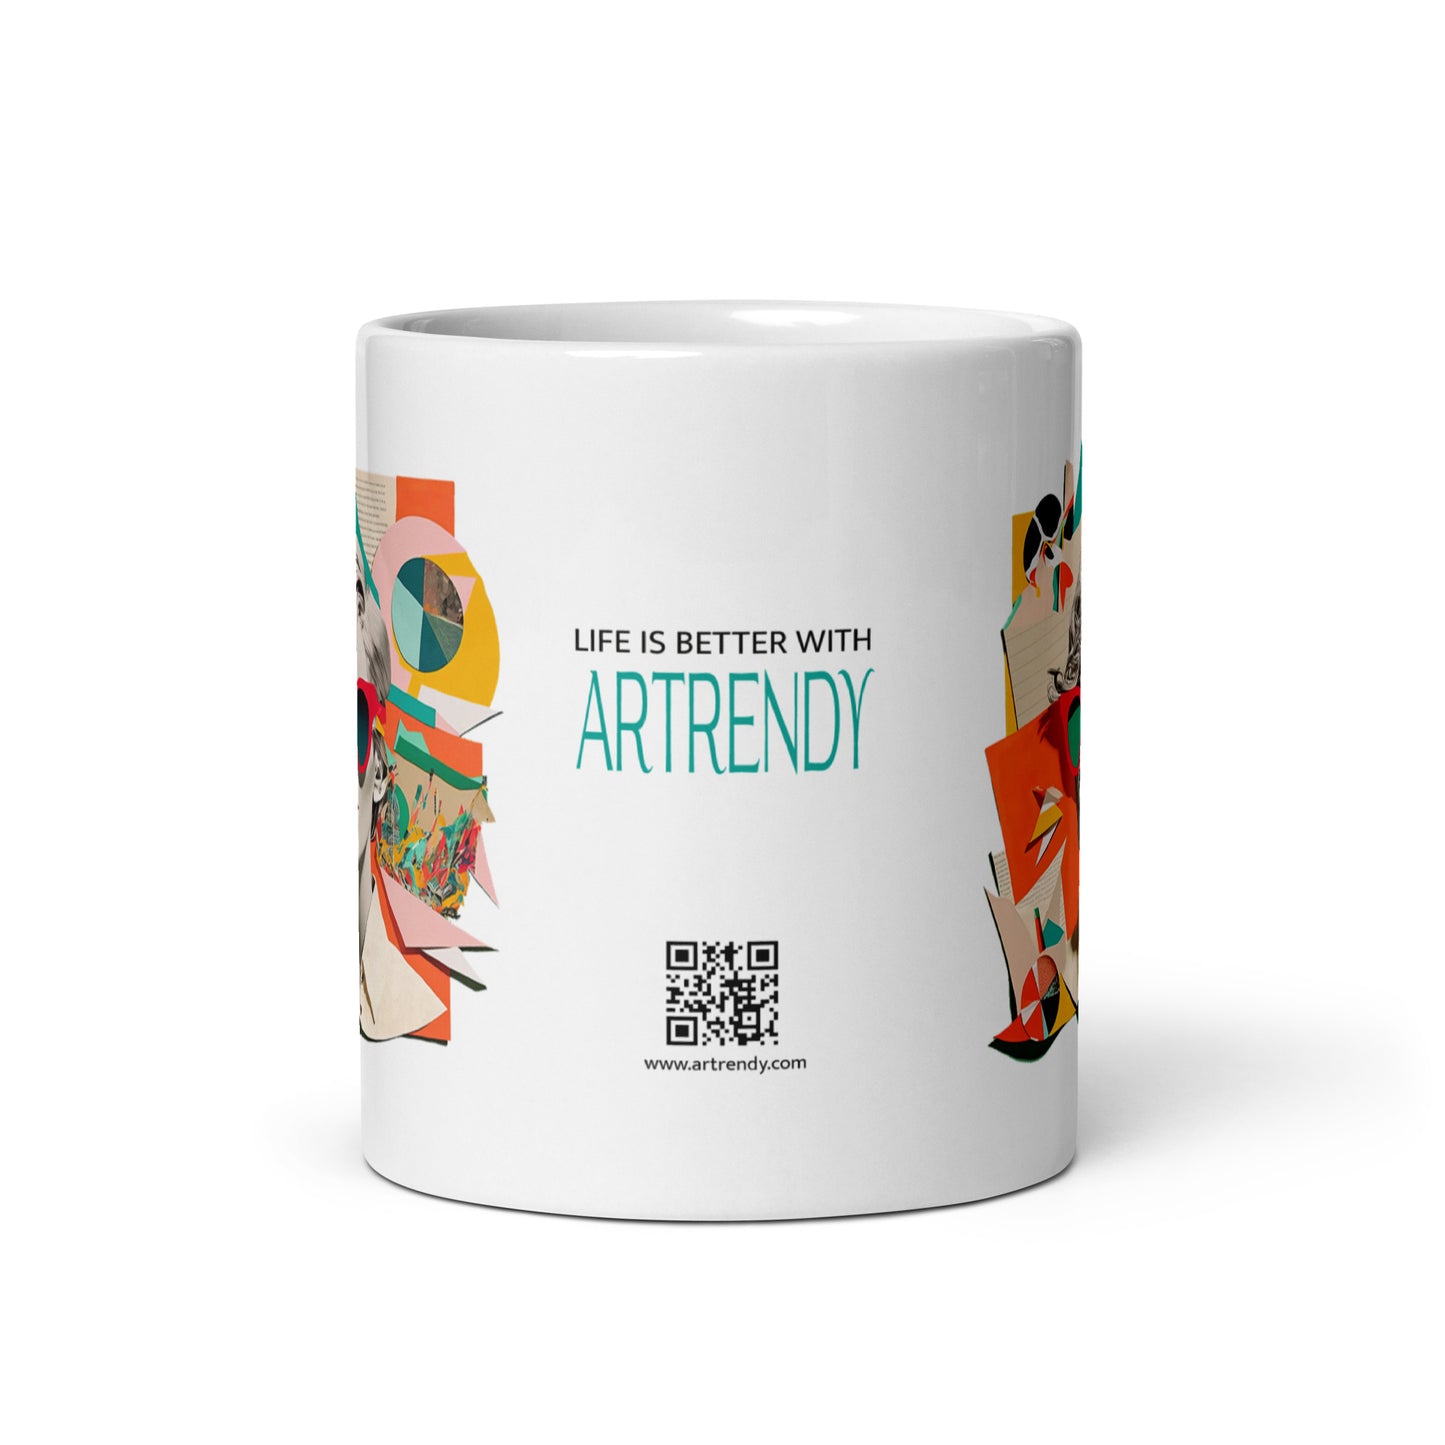 Life is Better with Artrendy - White glossy mug